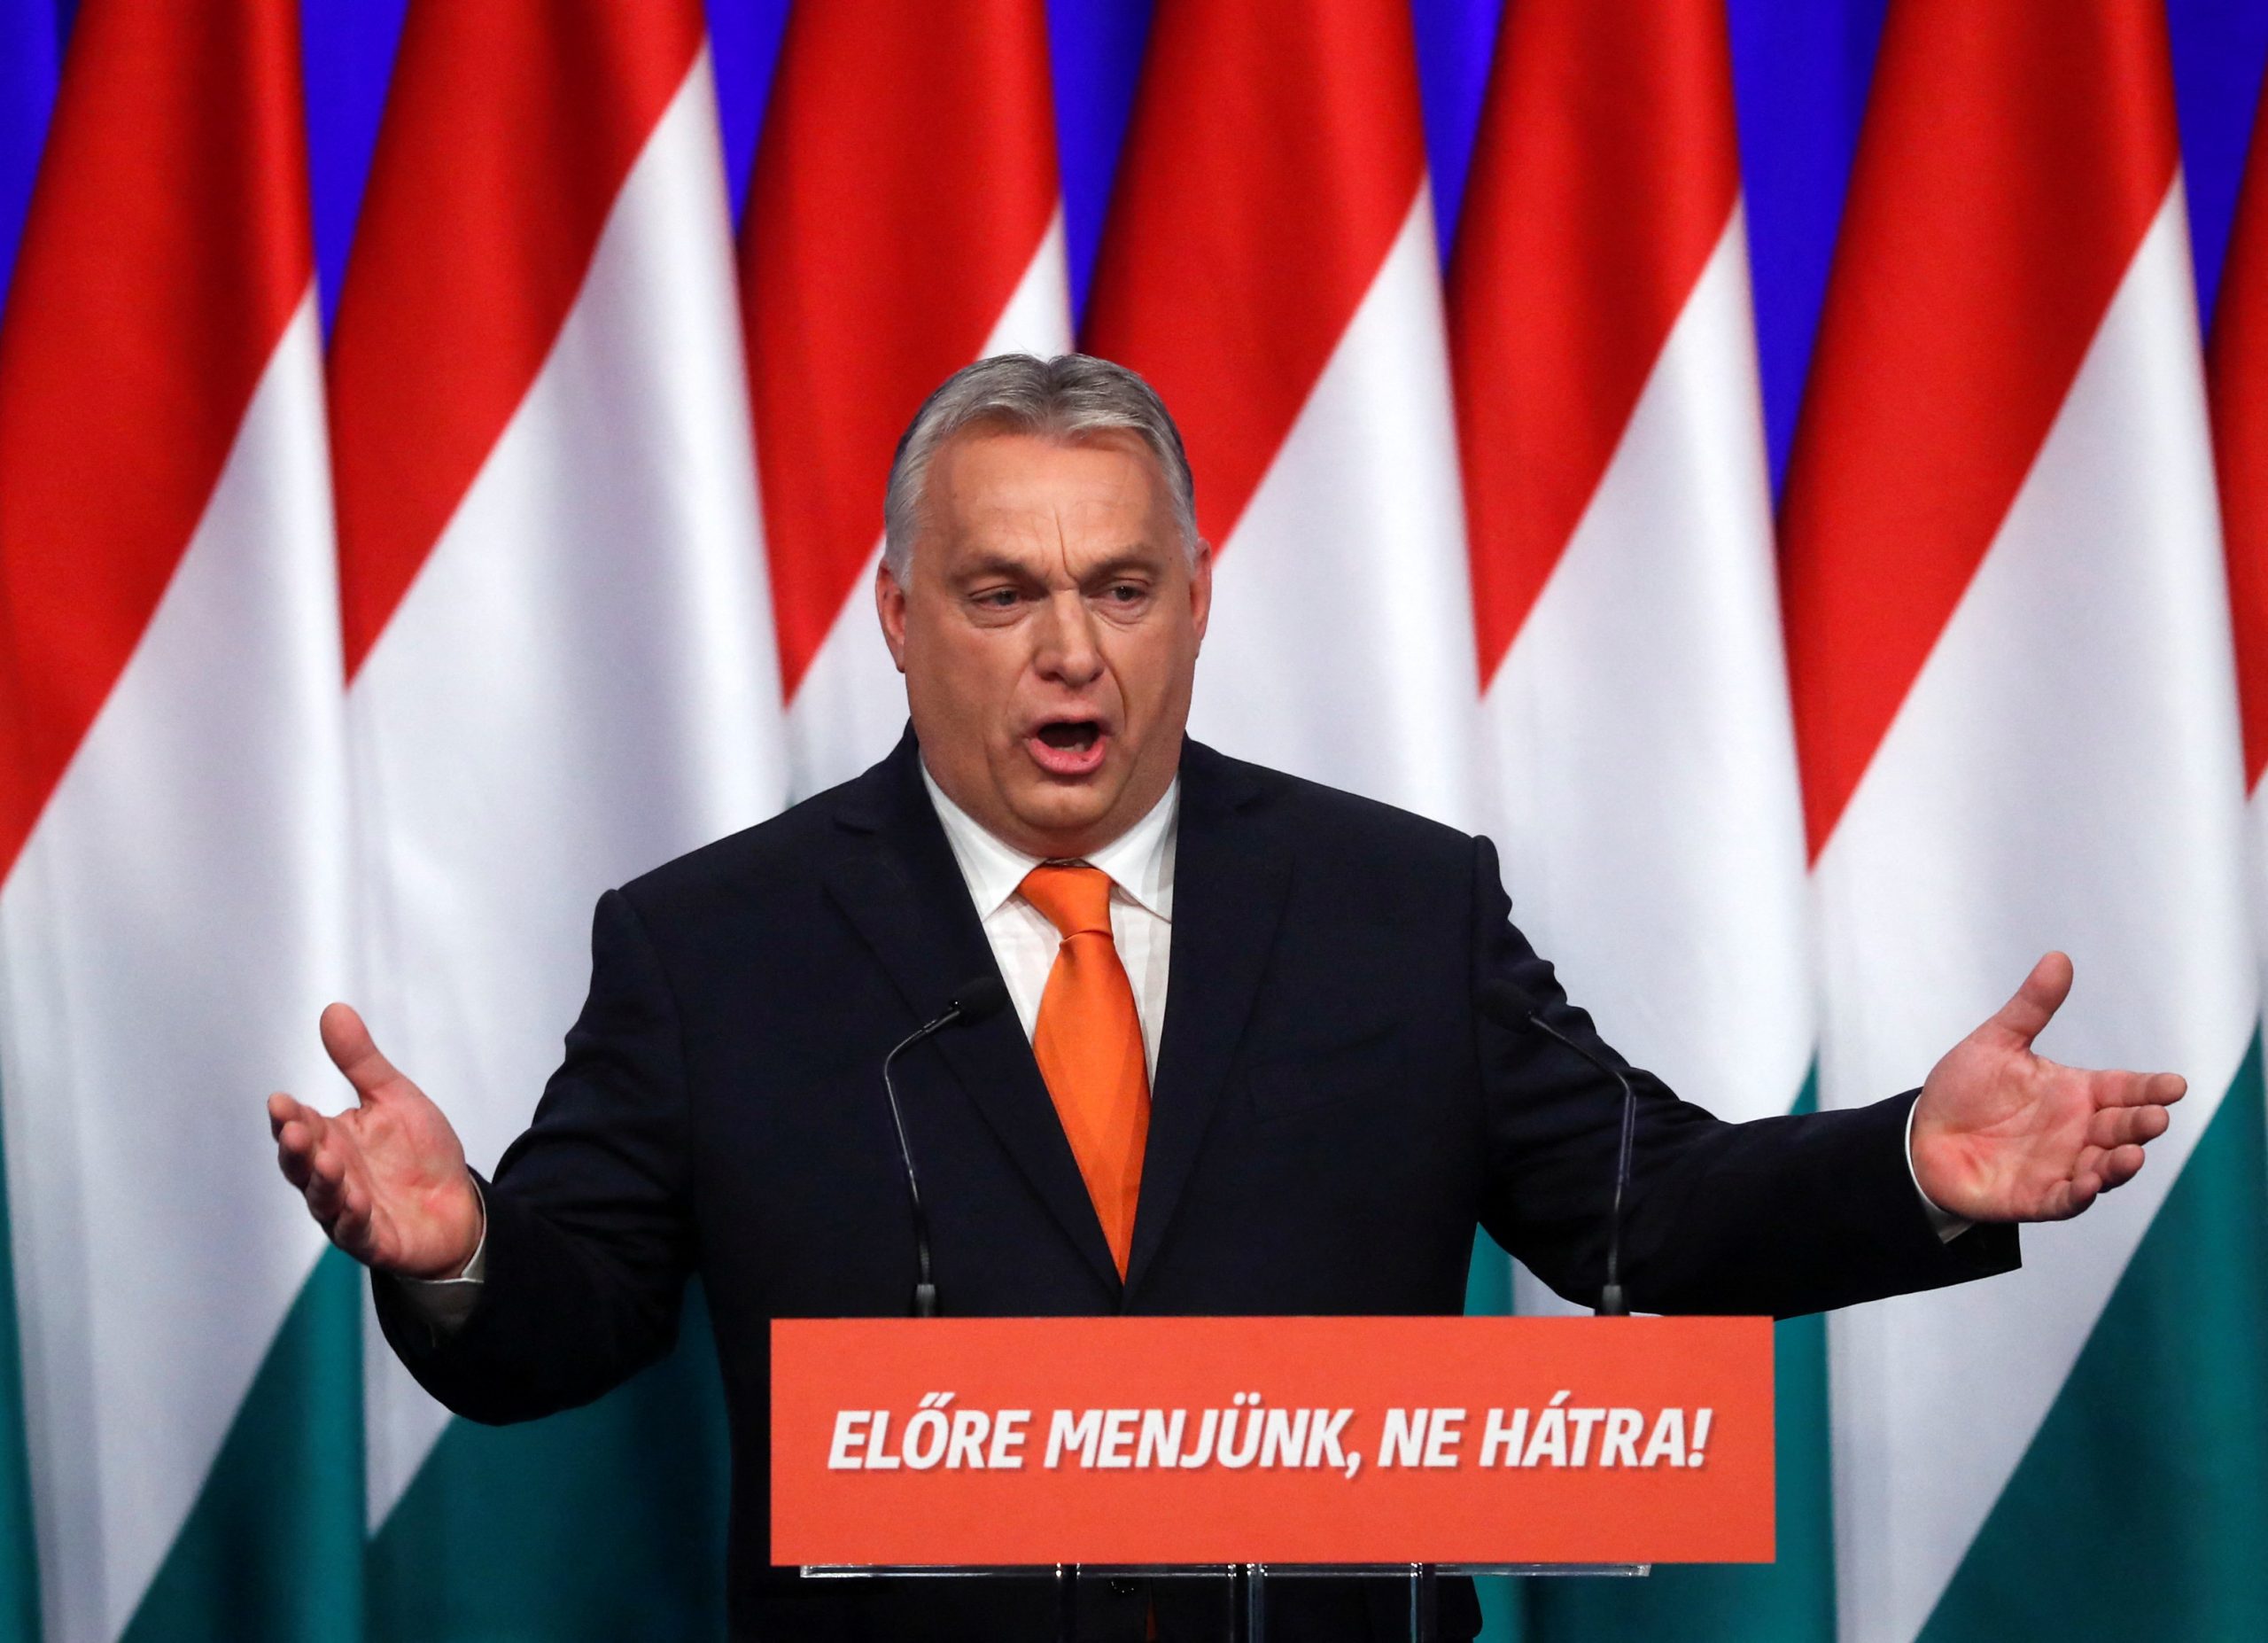 Hungarian Prime Minister Viktor Orban gestures as he delivers his annual state of the nation speech in Budapest, Hungary, February 12, 2022. Slogan reads "Let's go forwards, not backwards!".